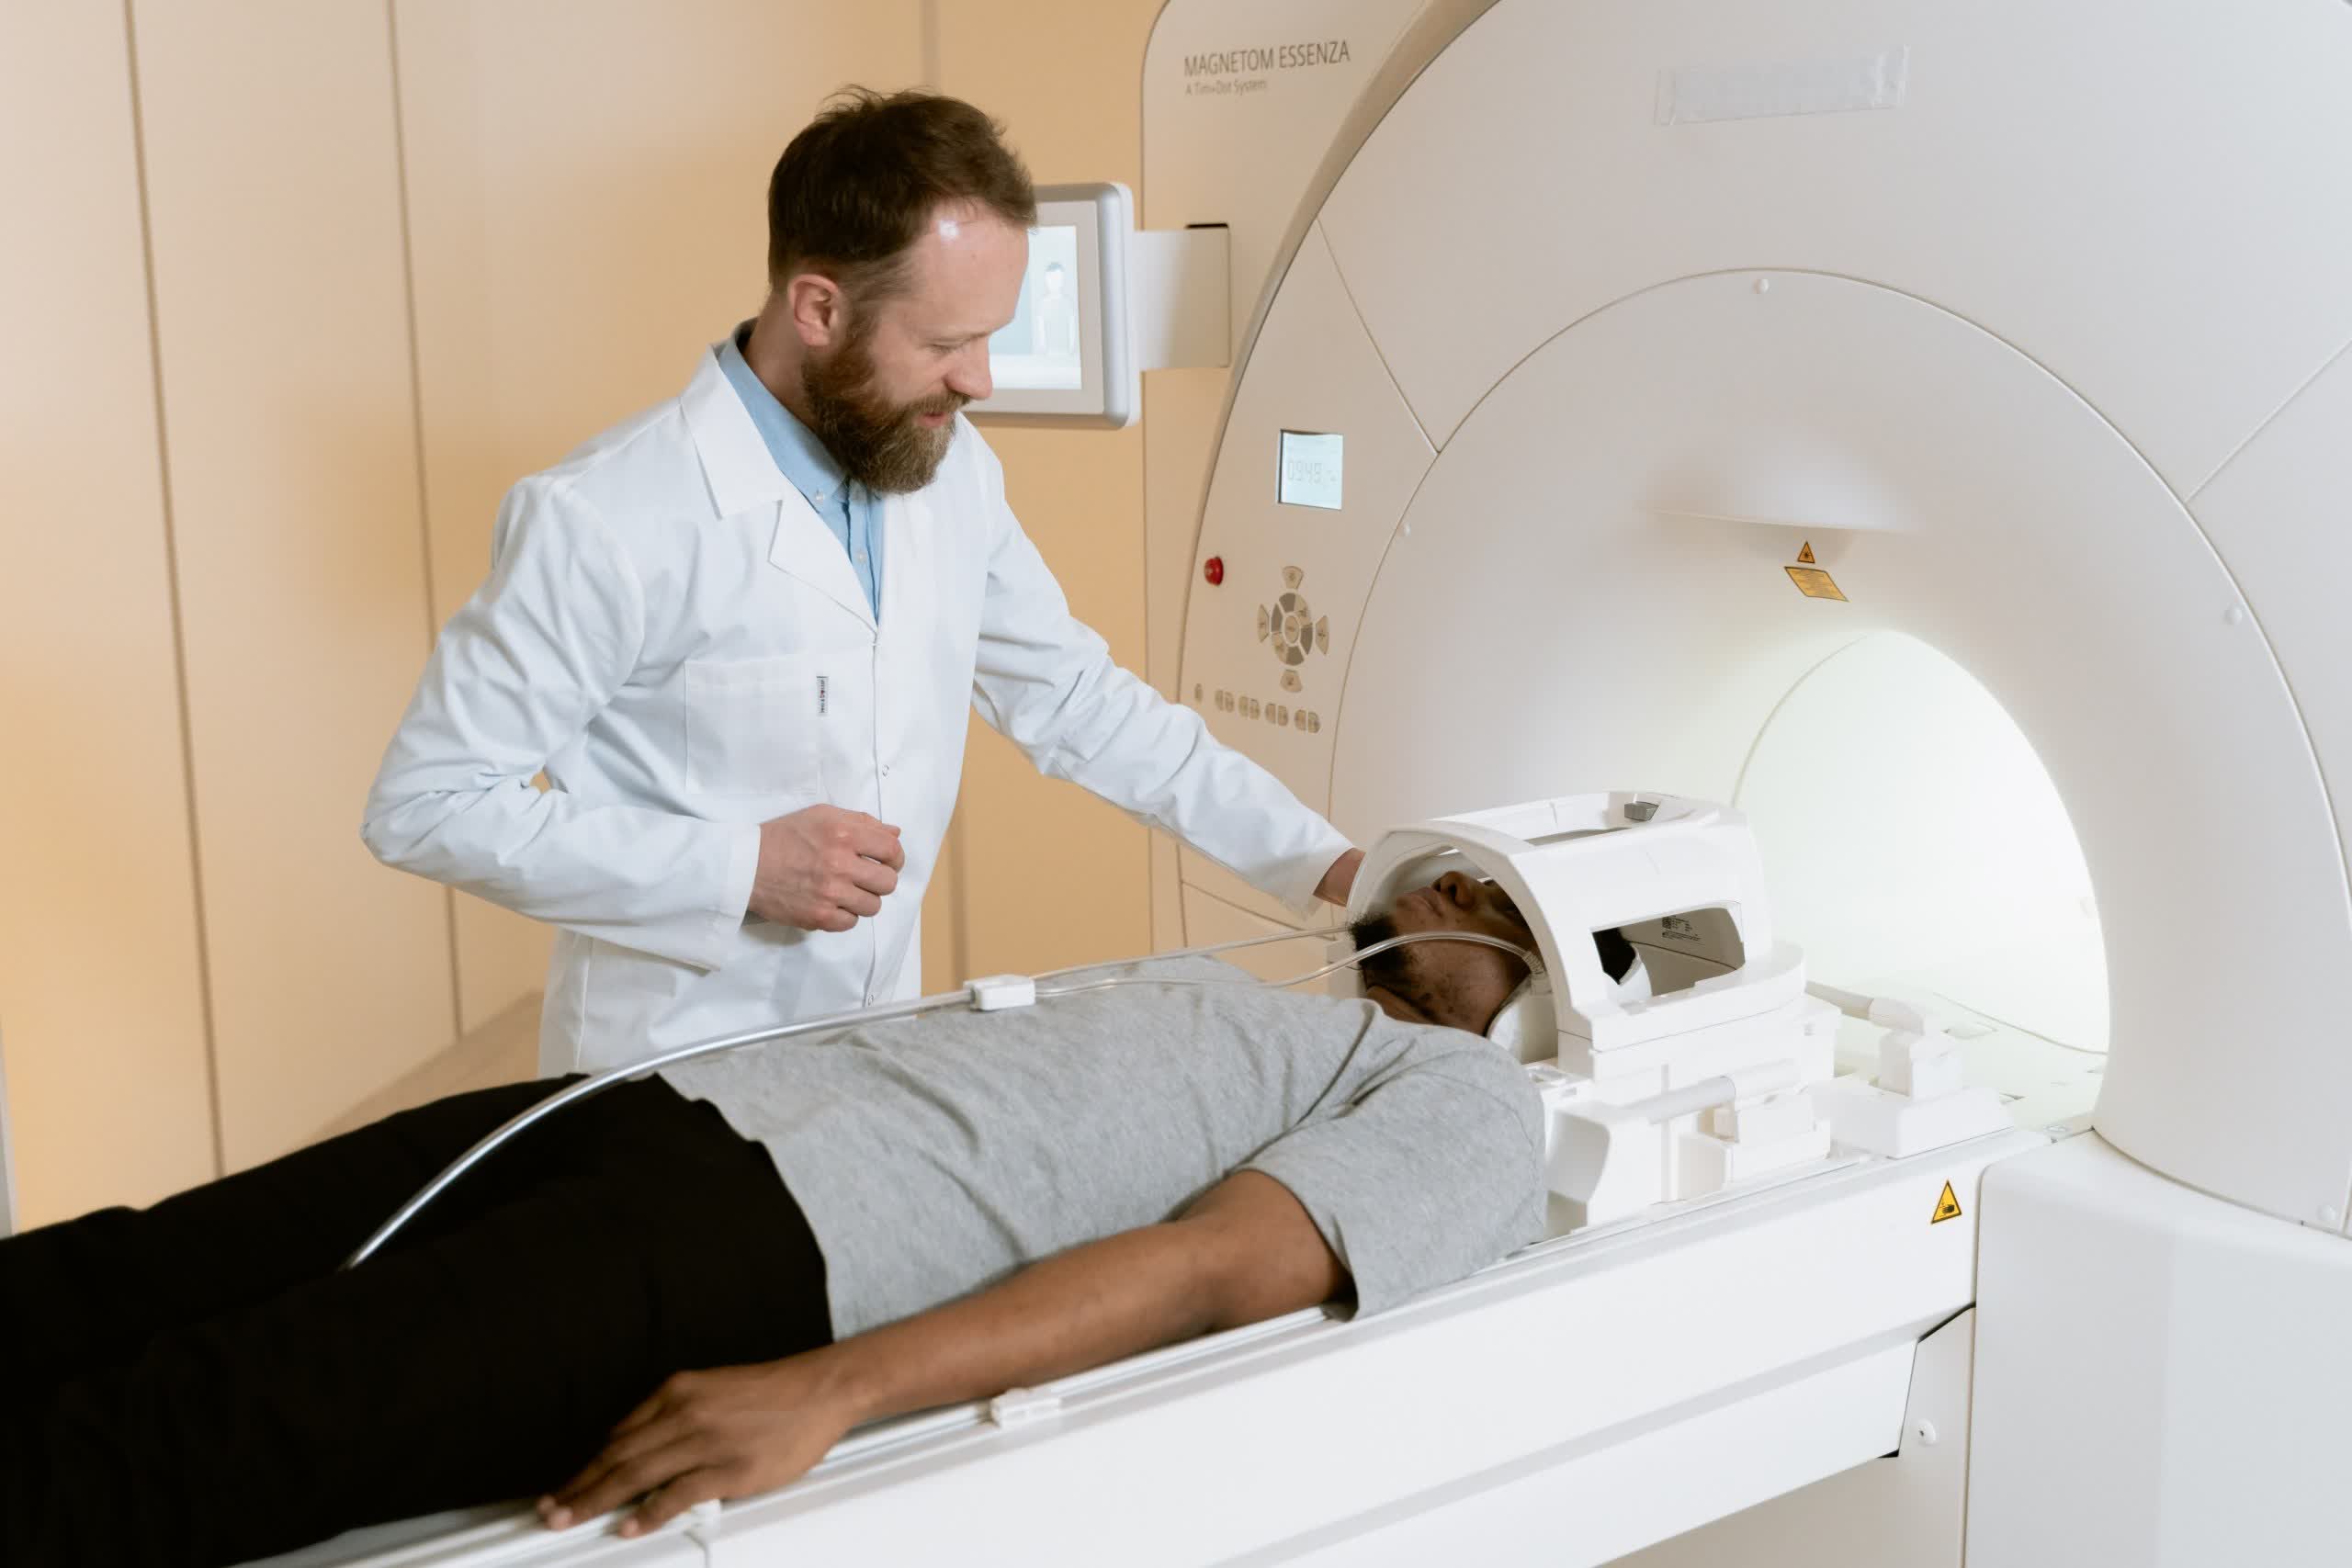 A global helium shortage has doctors concerned about a squeeze on MRIs